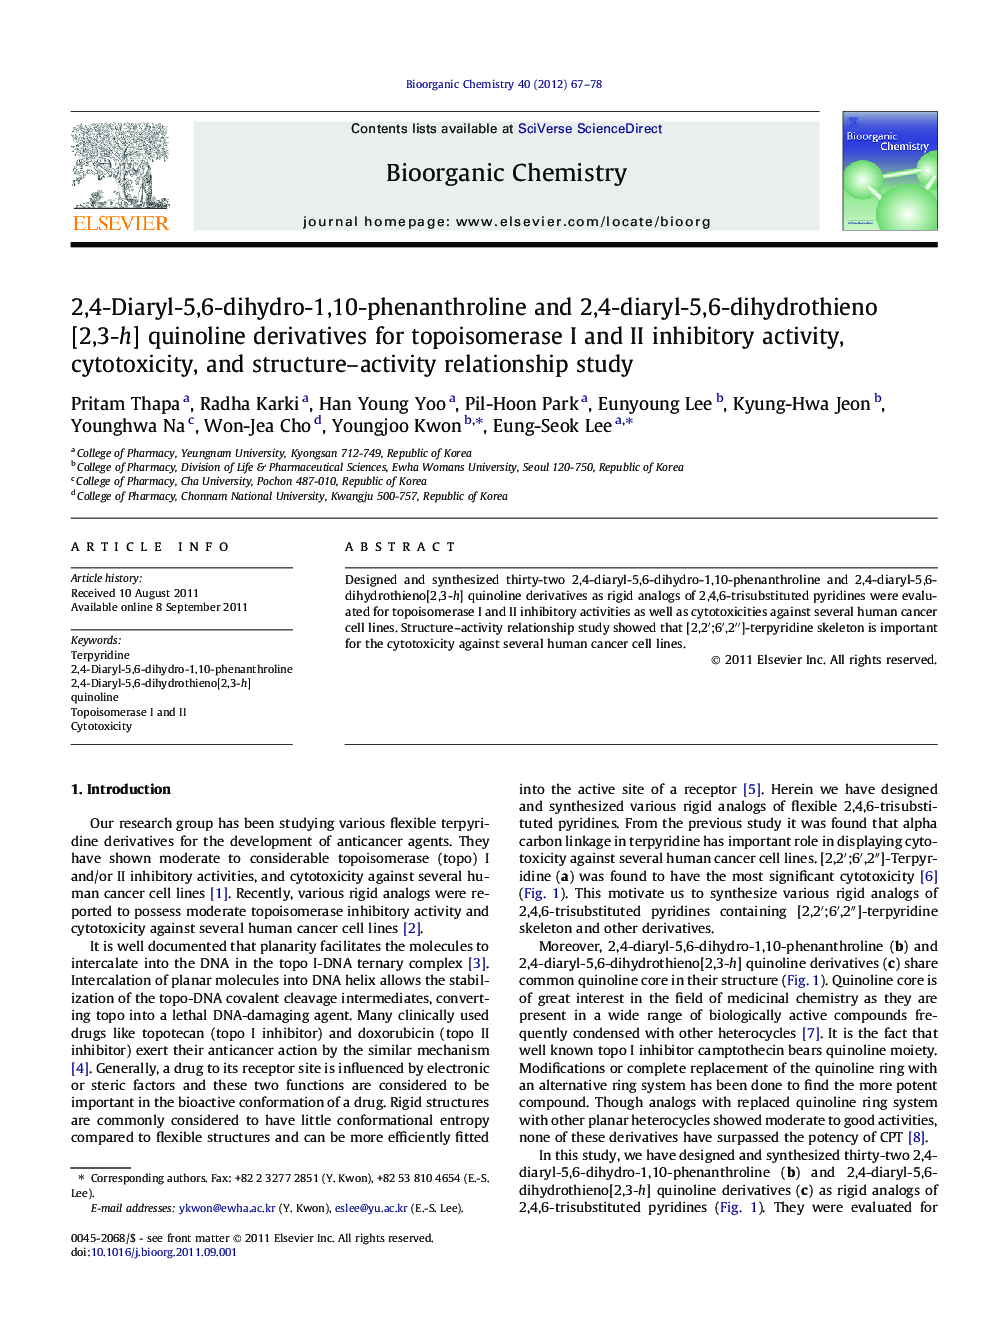 2,4-Diaryl-5,6-dihydro-1,10-phenanthroline and 2,4-diaryl-5,6-dihydrothieno[2,3-h] quinoline derivatives for topoisomerase I and II inhibitory activity, cytotoxicity, and structure-activity relationship study